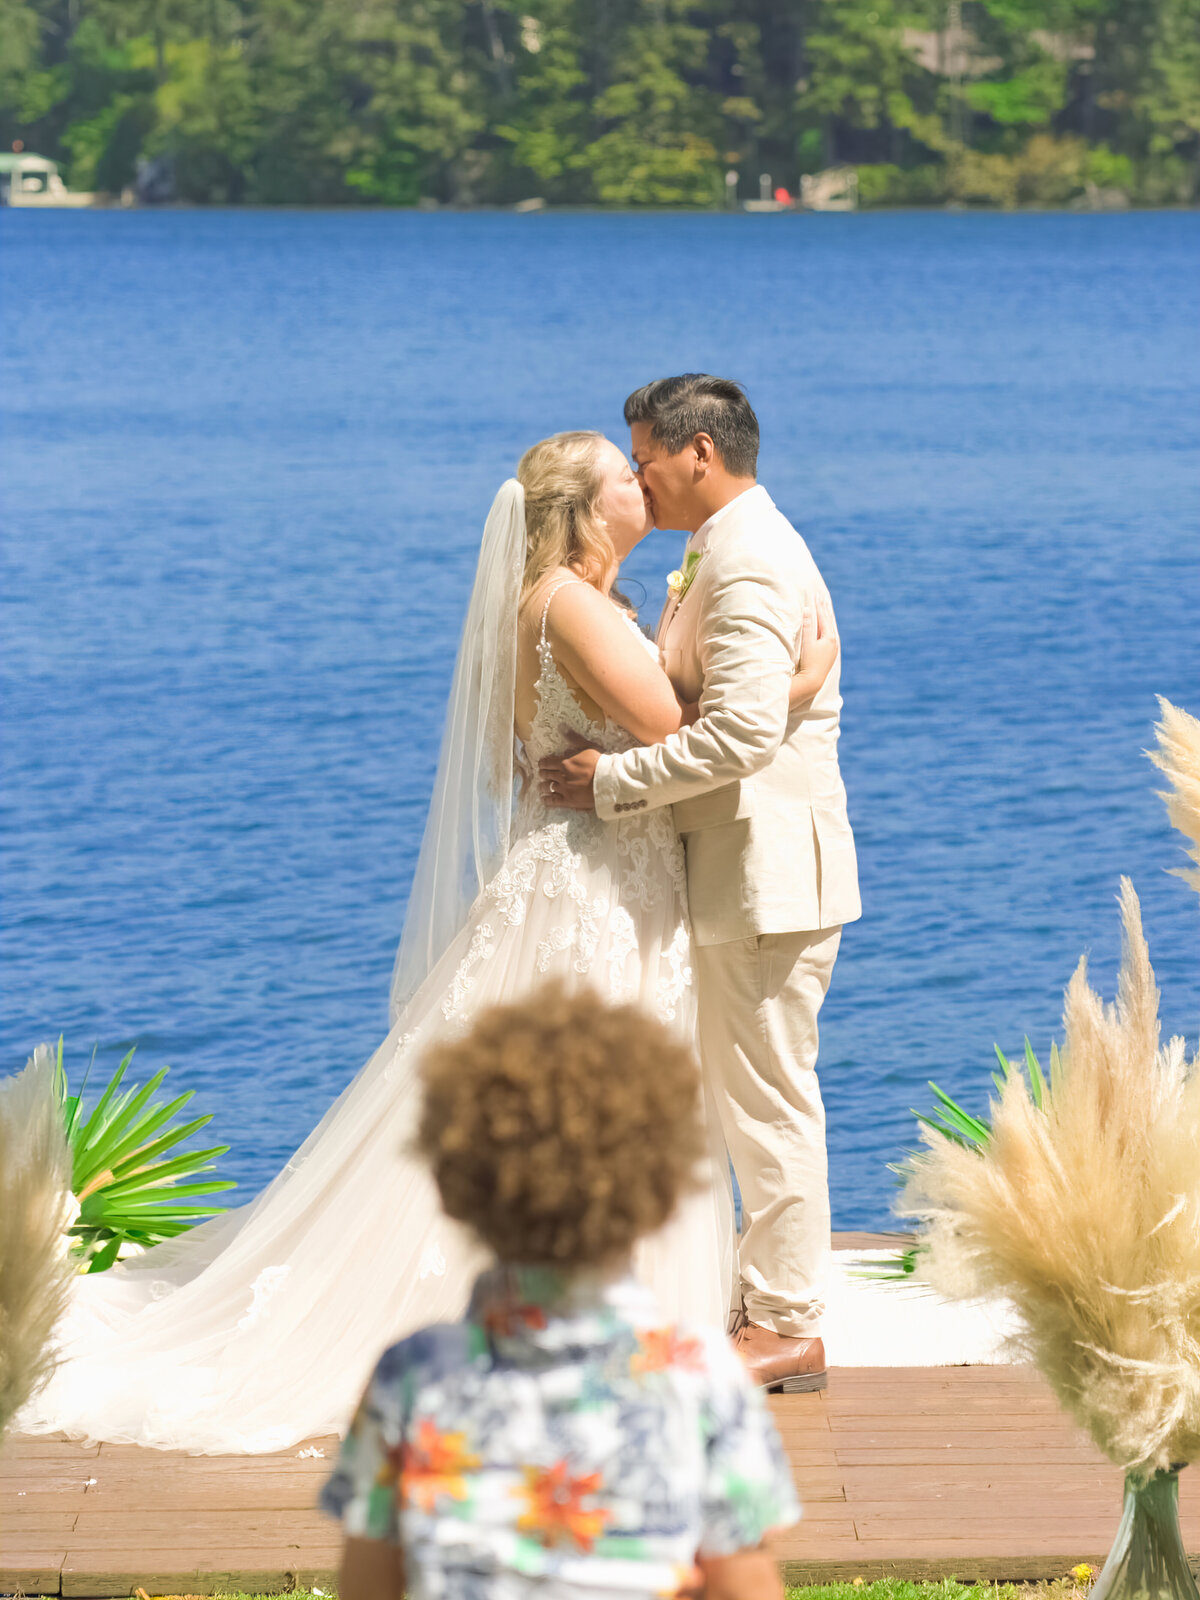 An unusual shot of a first kiss during a Tahoe wedding